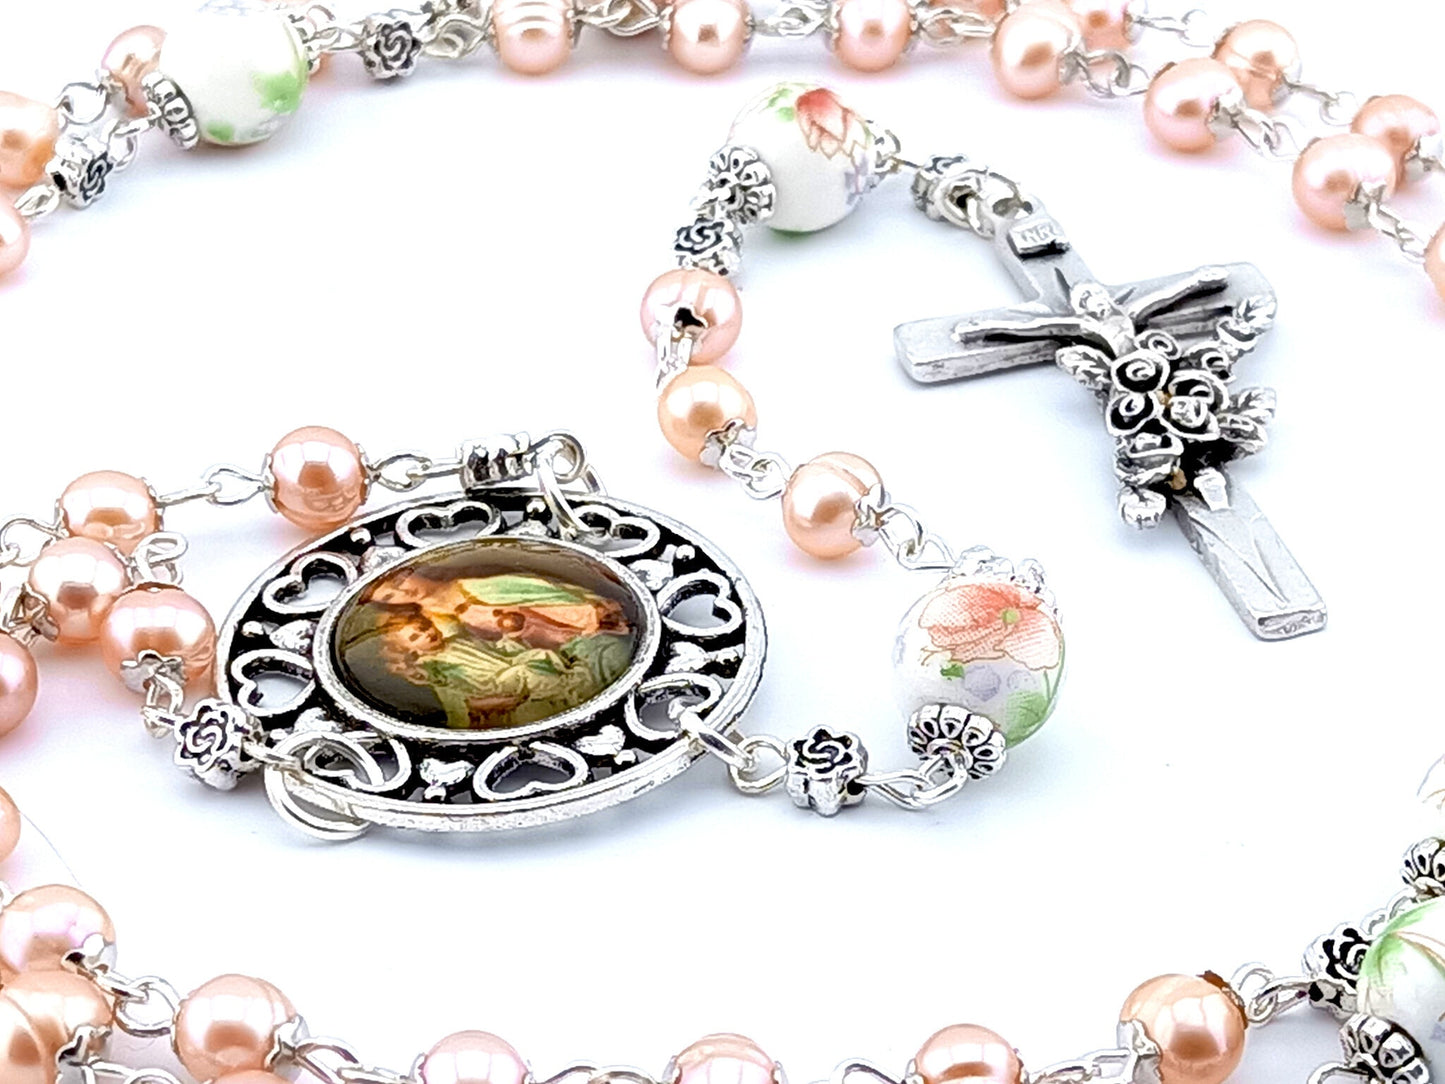 Mary and Child unique rosary beads with freshwater pearl beads, porcelain pater beads, silver crucifix and picture centre medal.